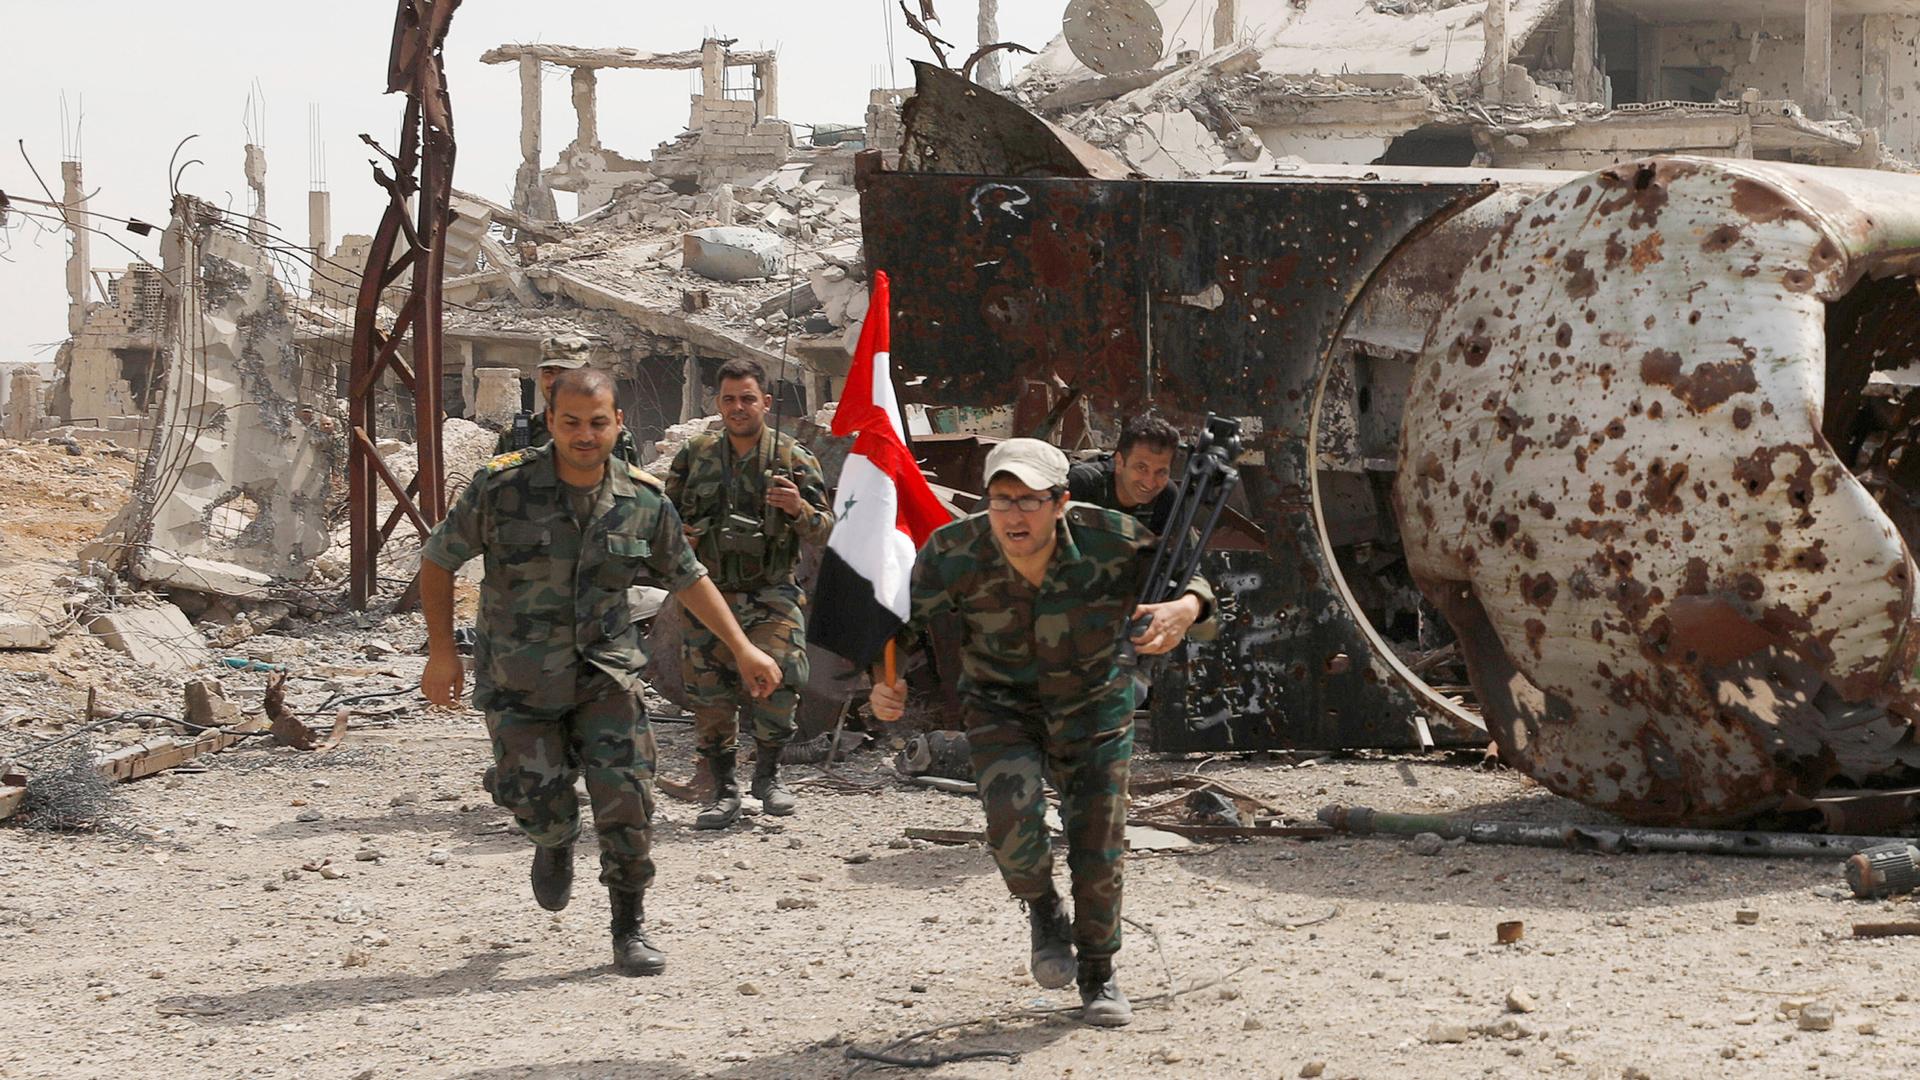 Soldiers loyal to Syria's President Bashar al-Assad are seen running toward the camera with one carrying the Sryian flag.